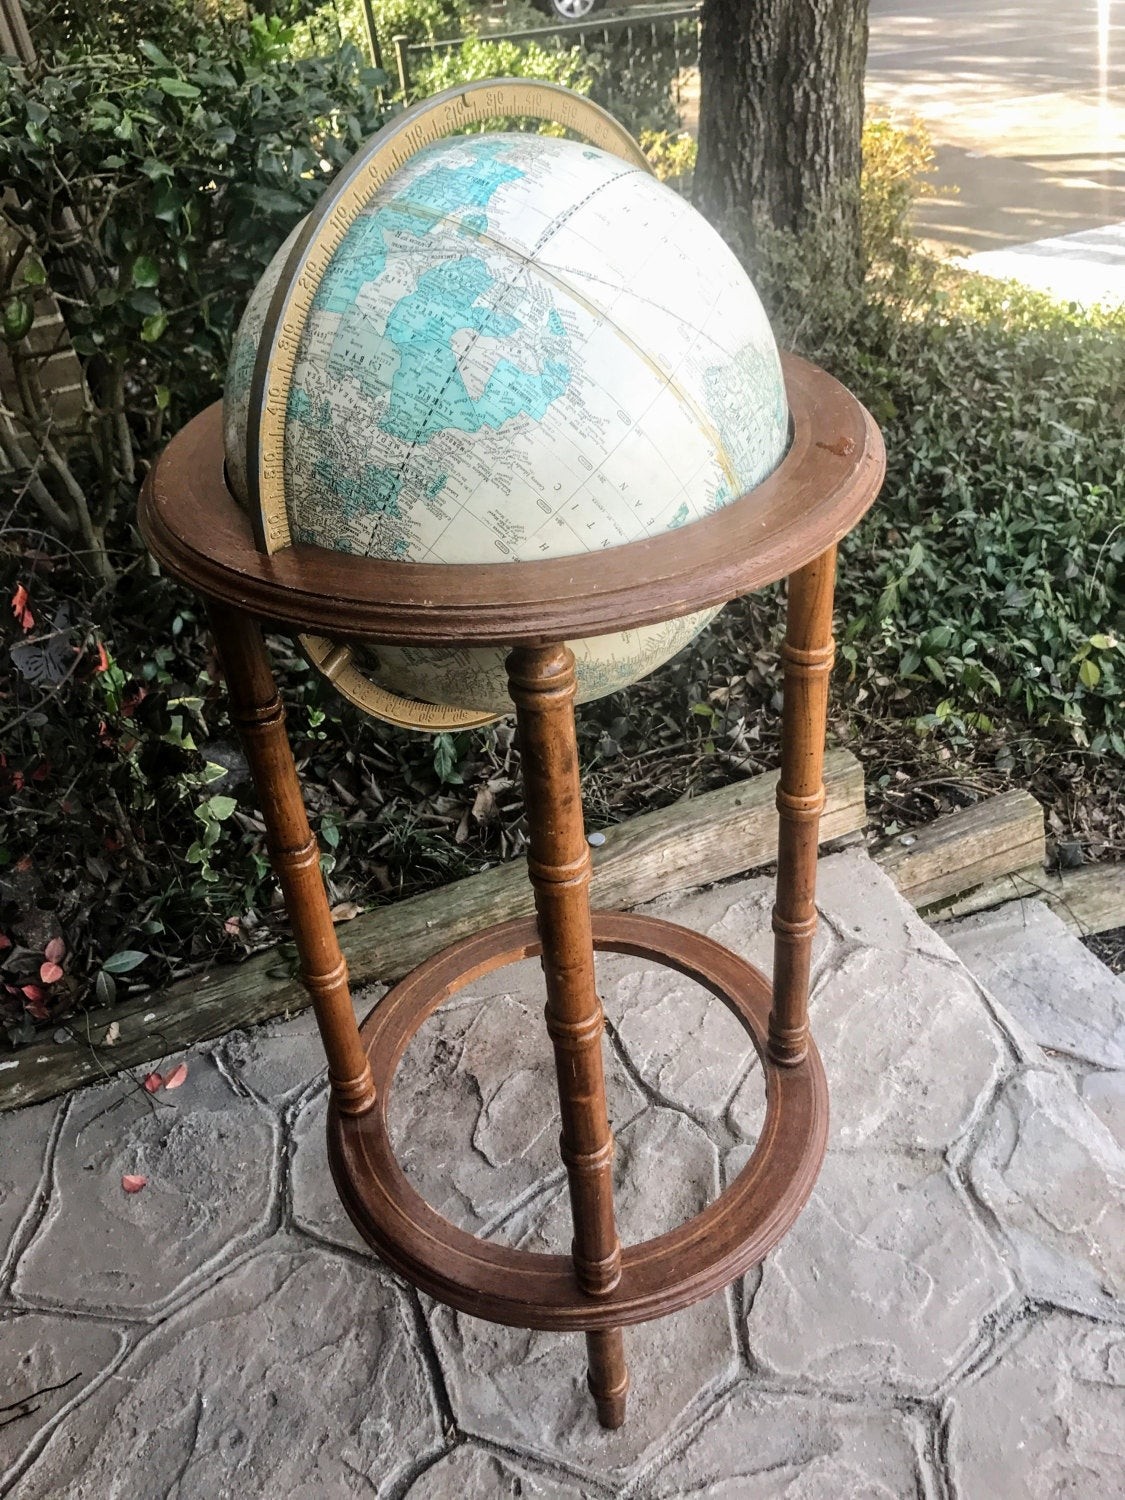 Crams imperial floor standing world globe on wood stand